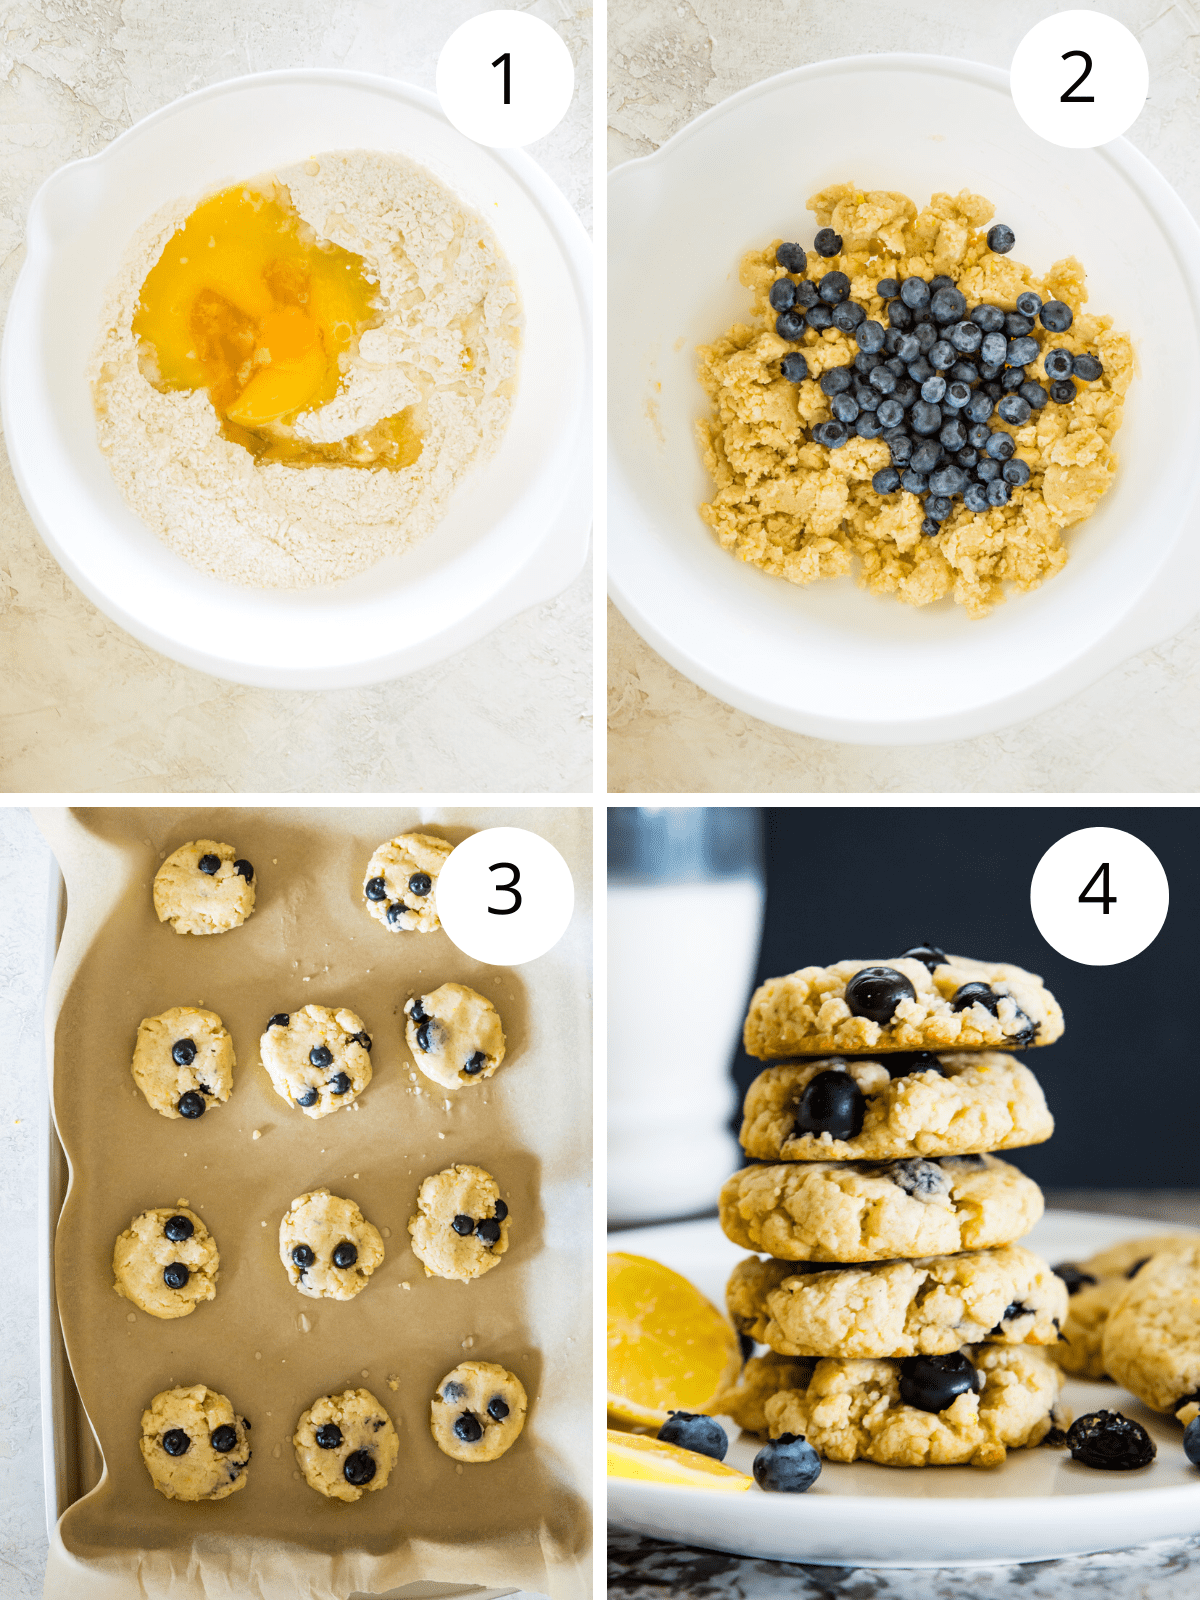 Step by step directions for making lemon blueberry cookies.